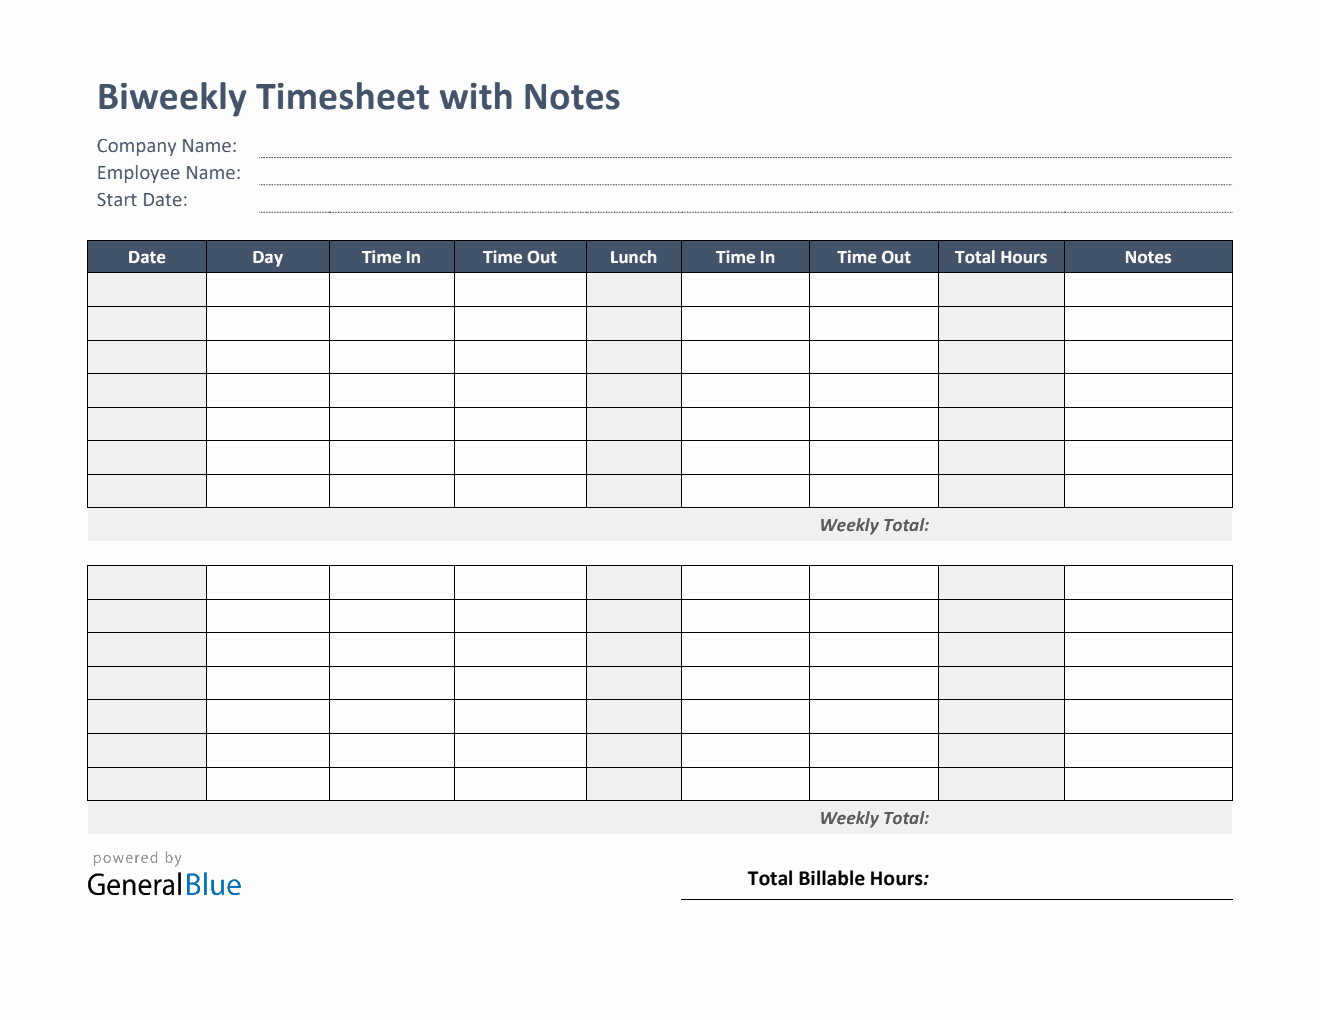 Biweekly Timesheet With Notes in Word